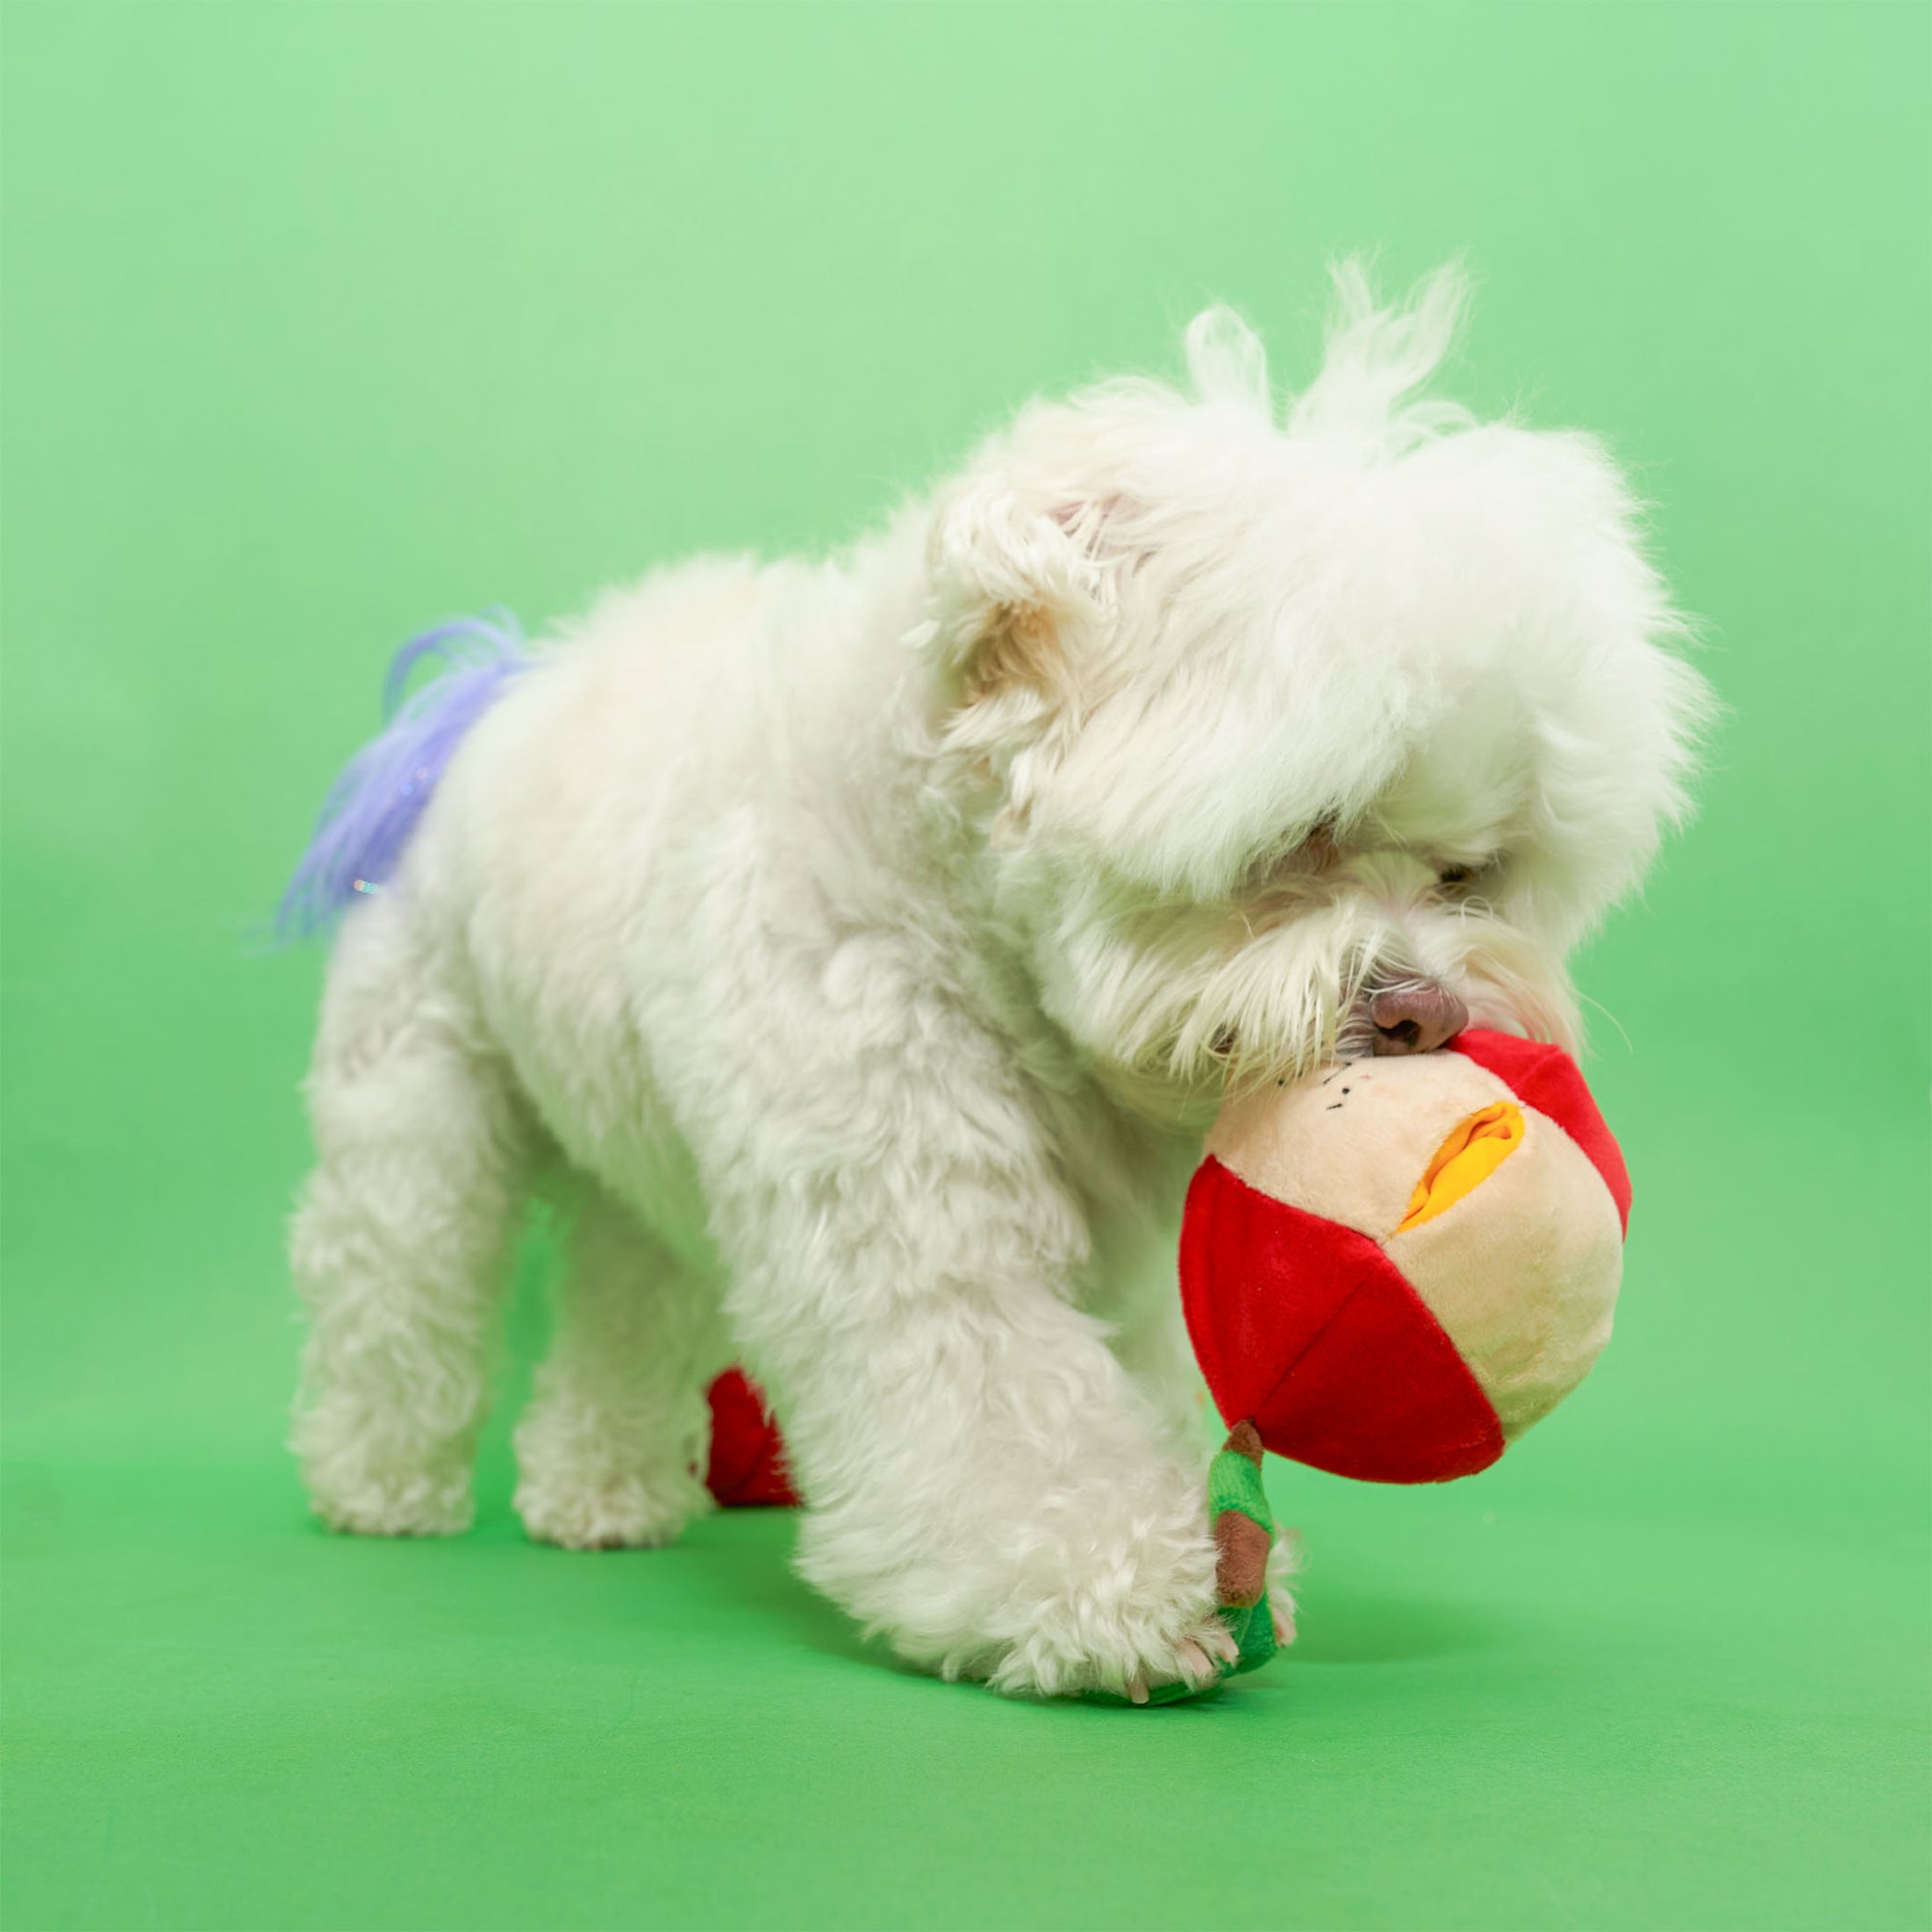 A white fluffy dog with a blue accessory on its back biting a red and white apple-shaped dog toy with a green leaf on a green background.